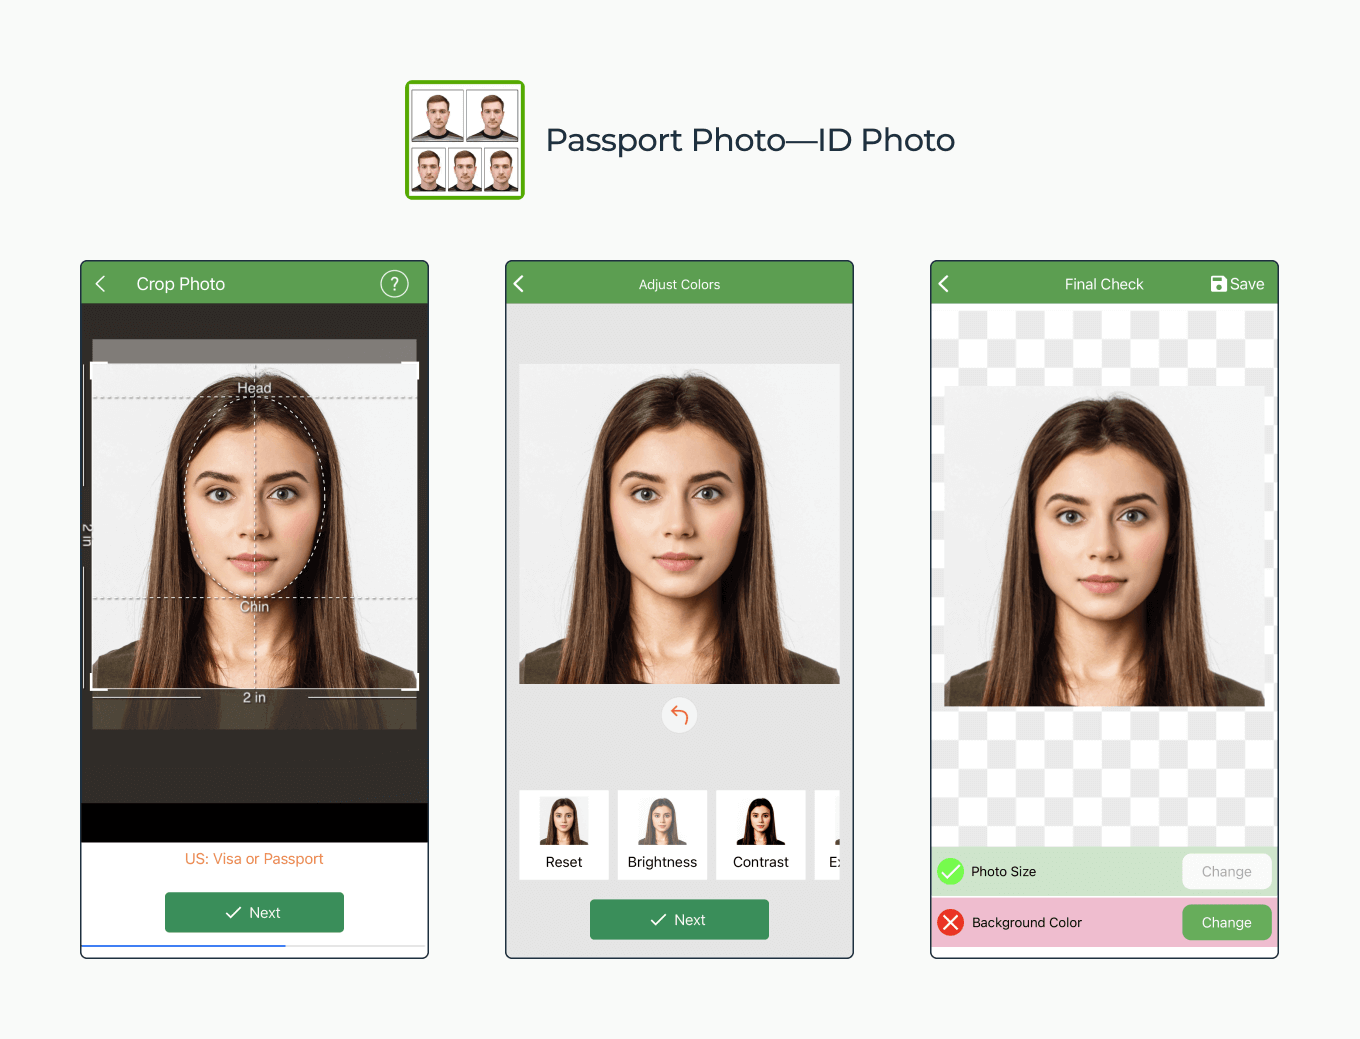 Instructions on how to adjust an image to match the dimensions of a passport photo.